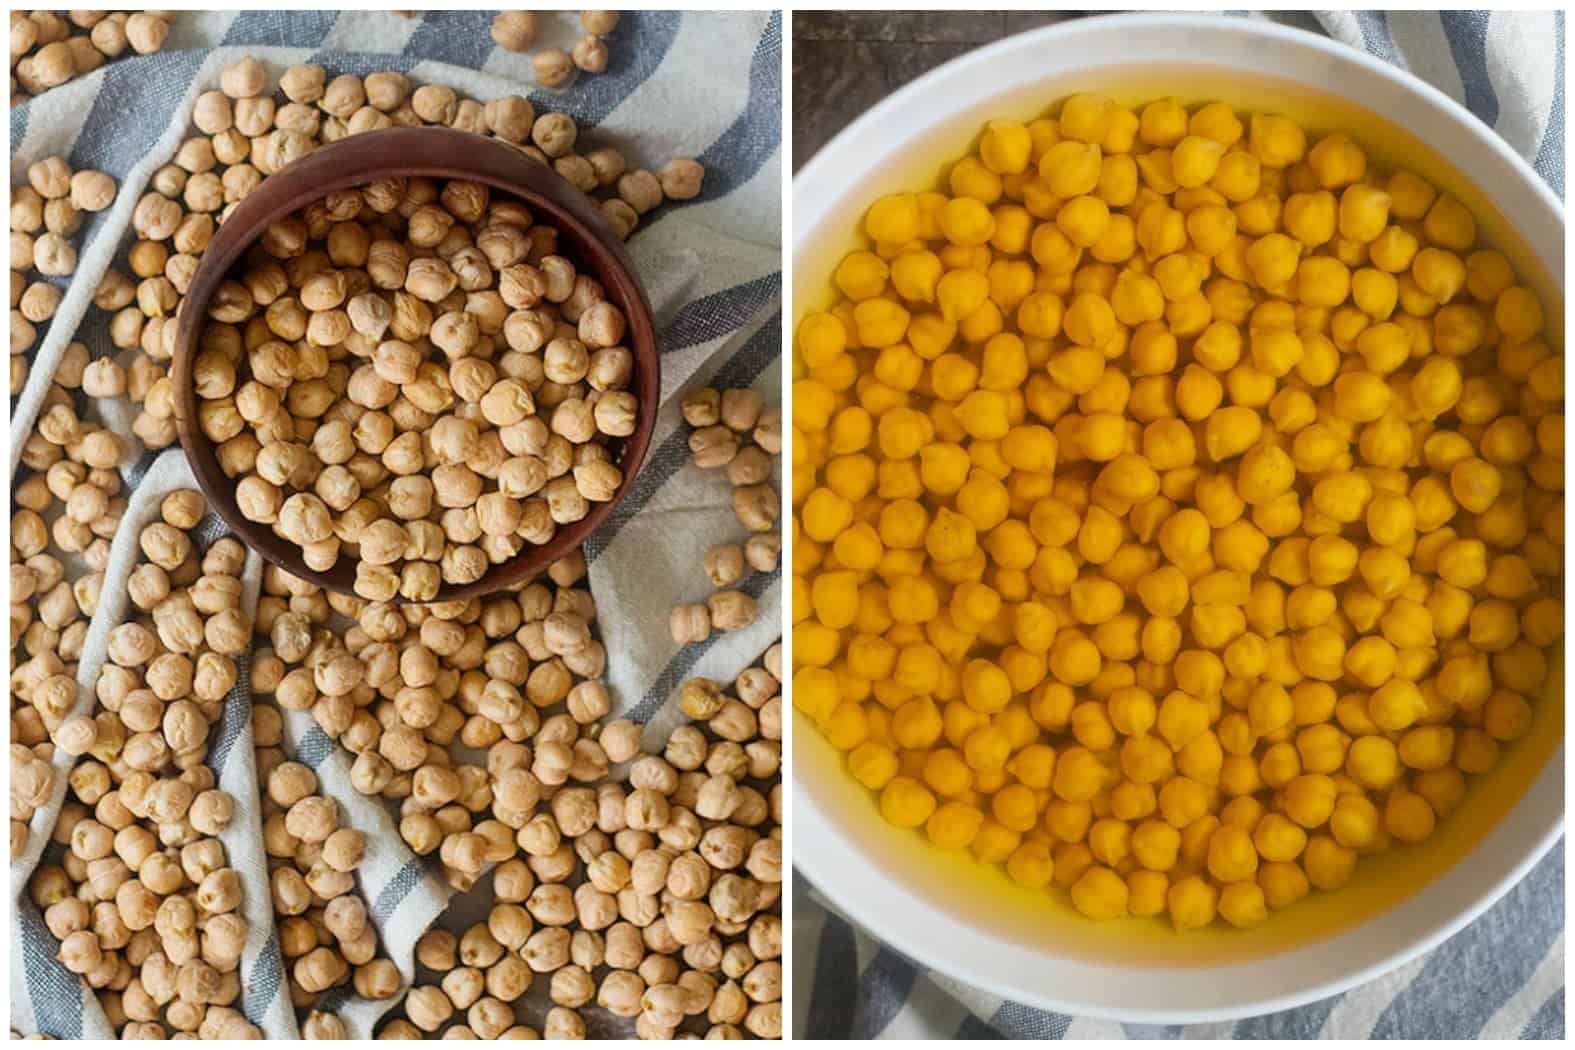 To start, soak chickpeas in water for 18 hours. 